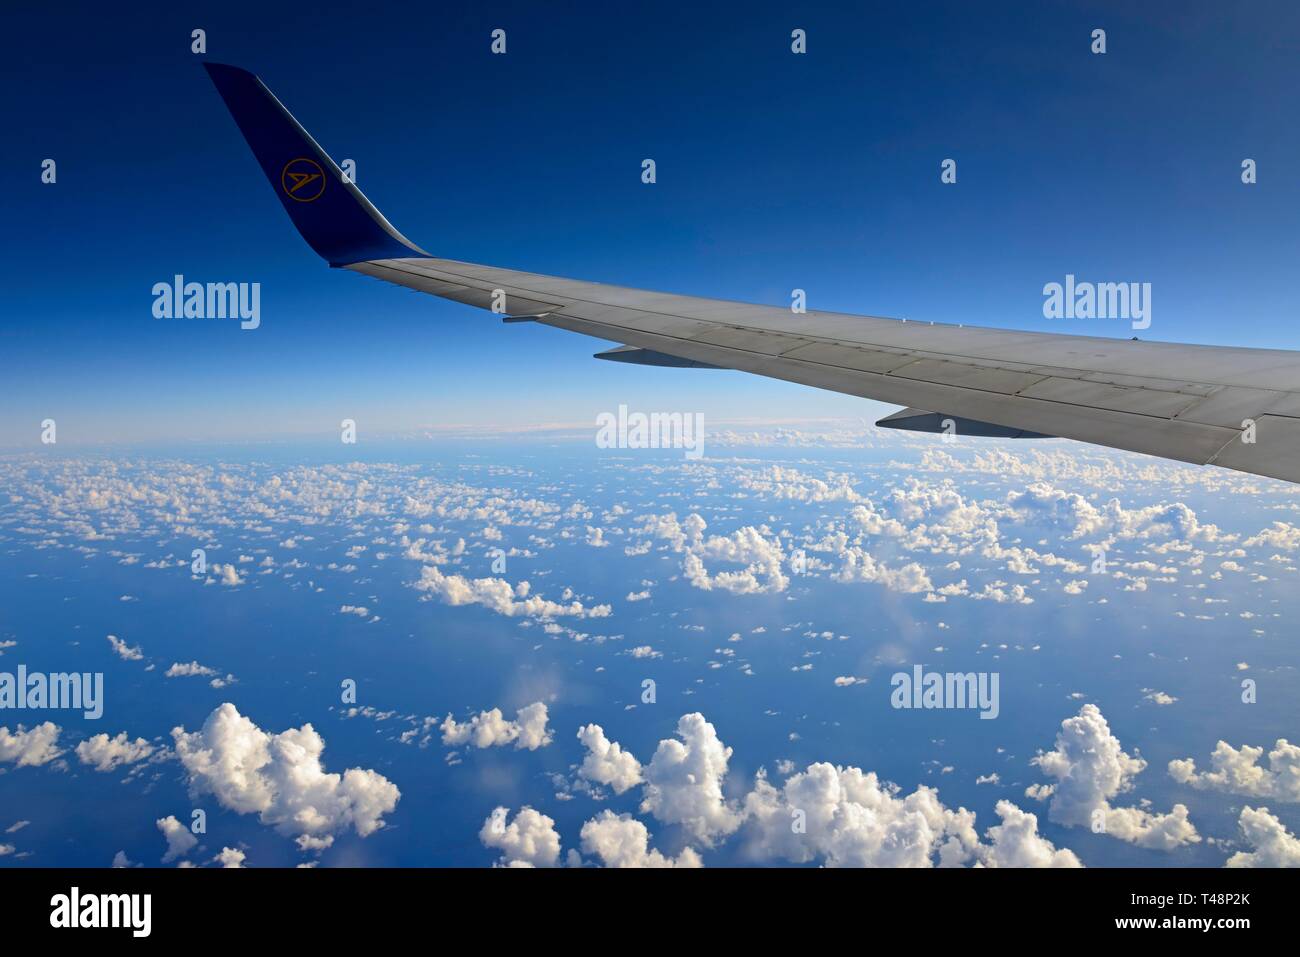 Wing of an airplane above the clouds, Dominican Republic Stock Photo